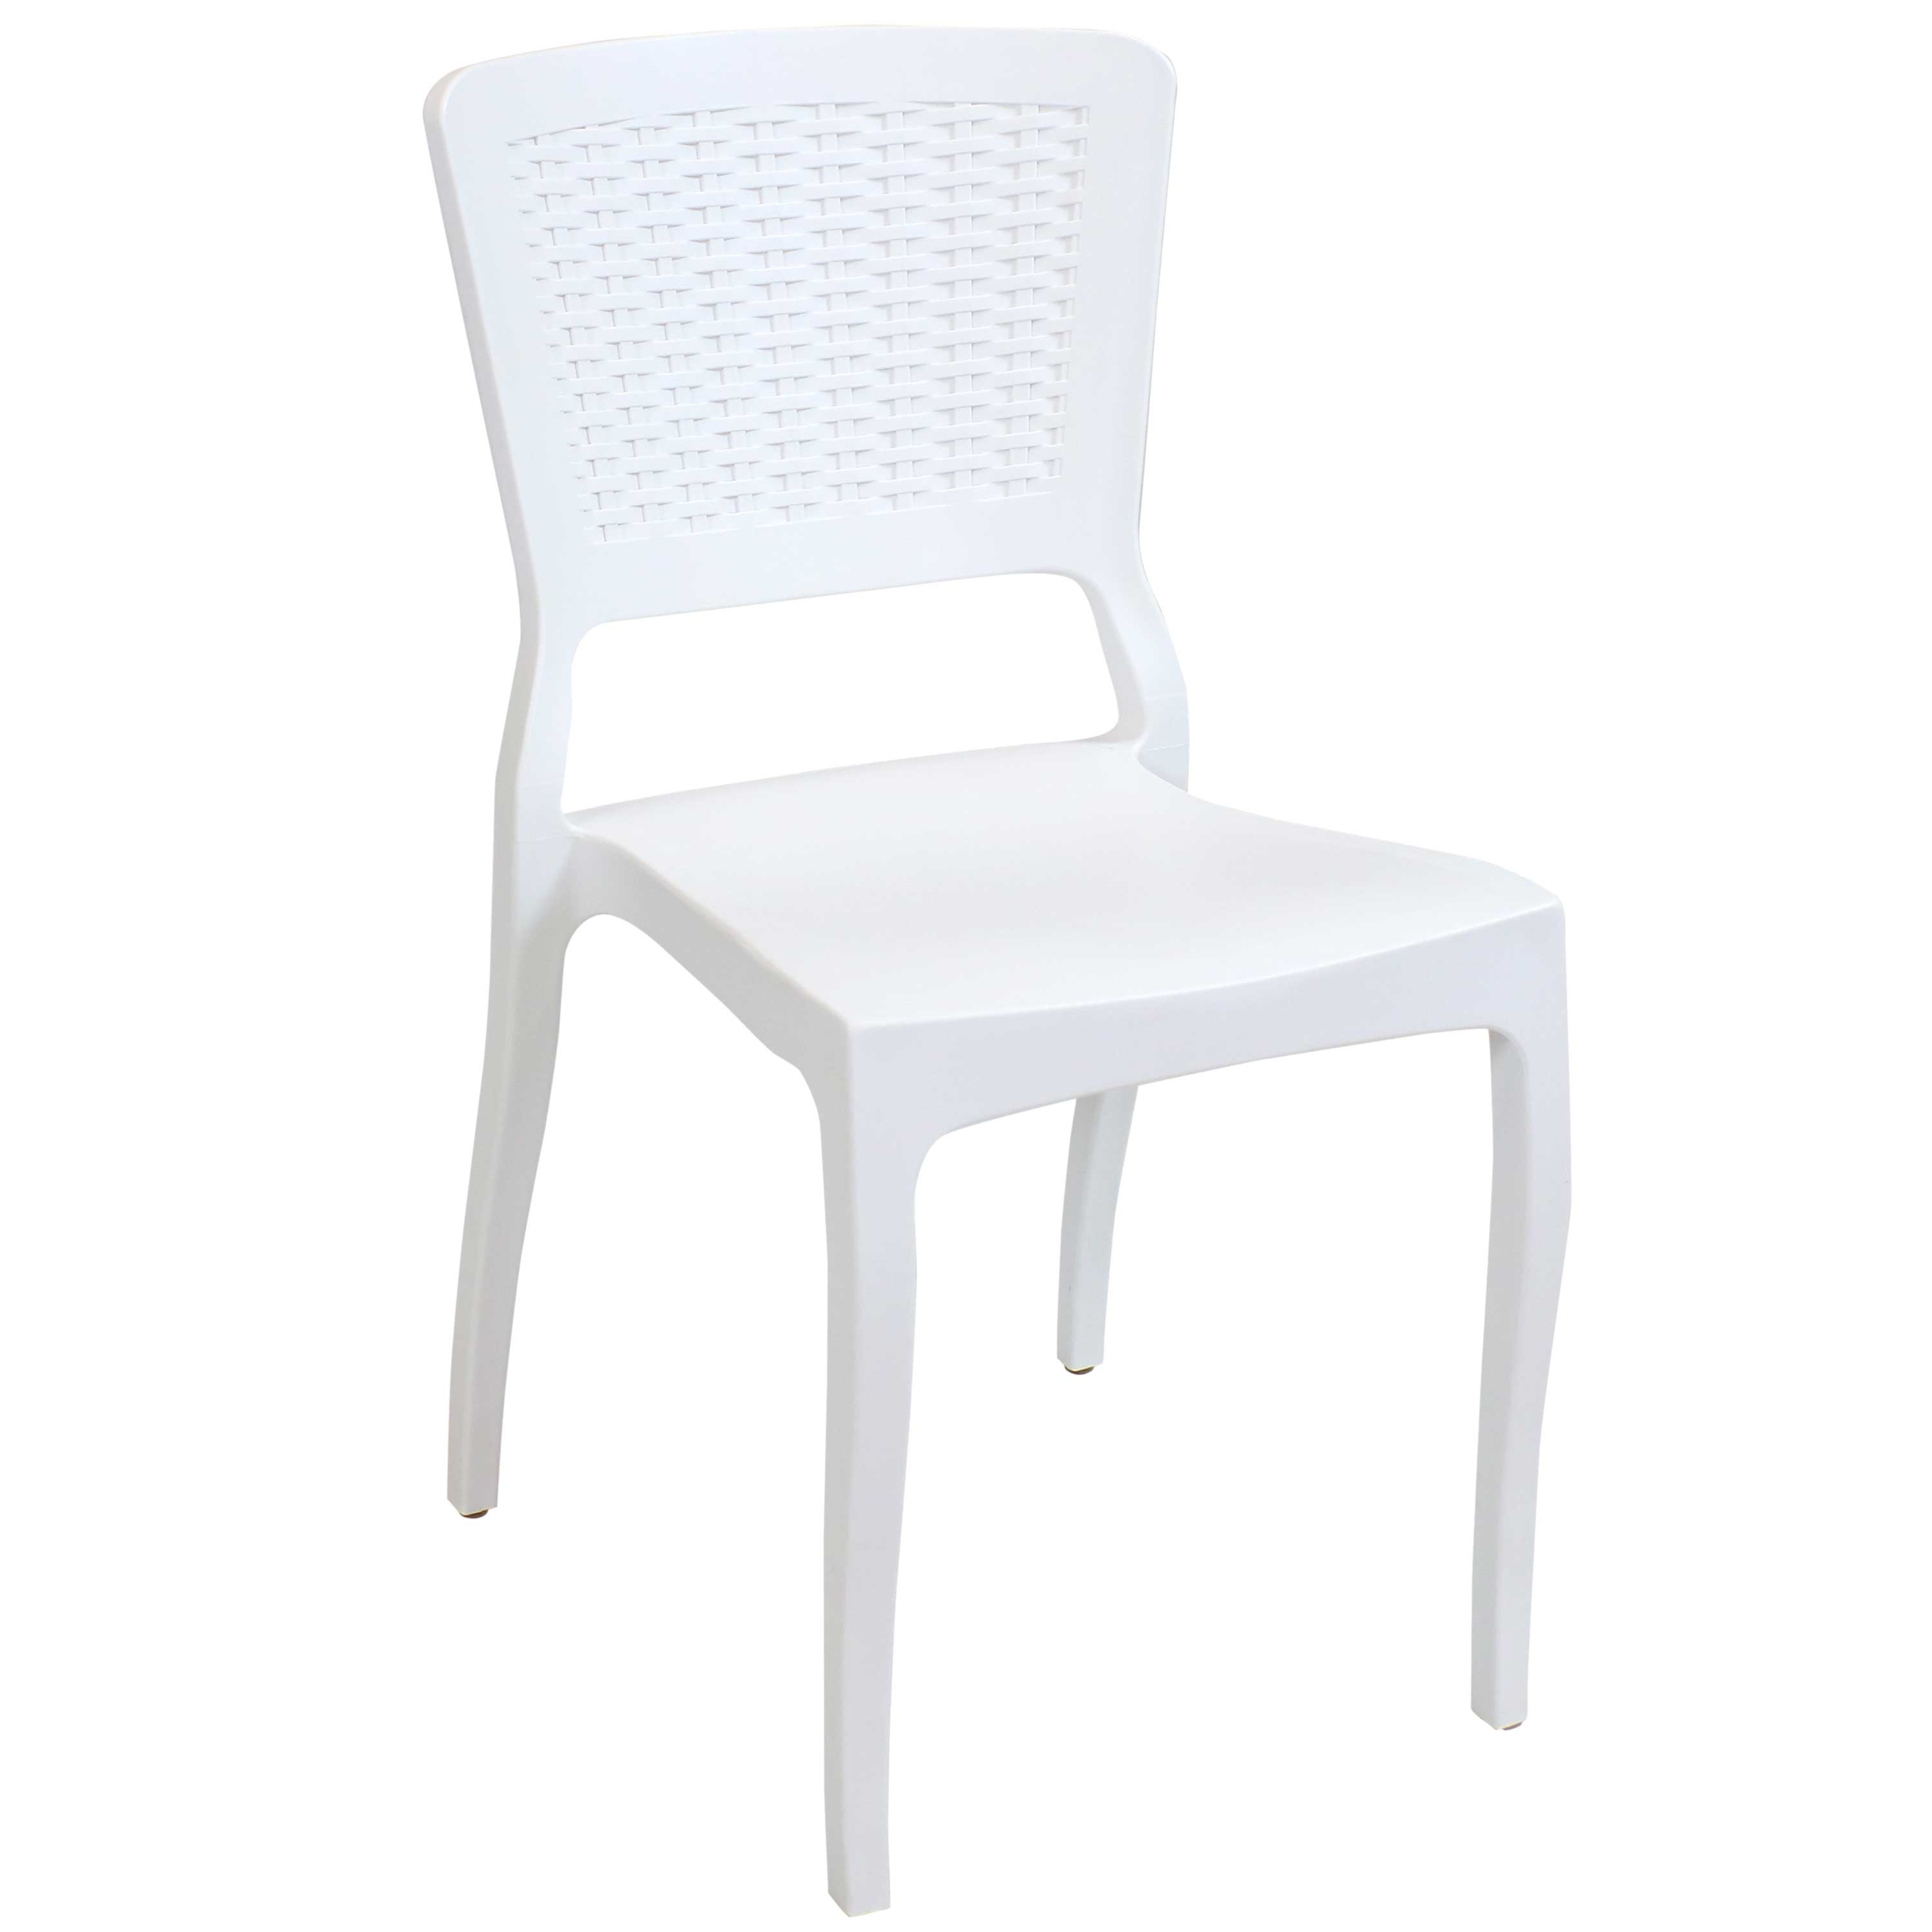 White Plastic Patio Chairs Visualhunt, White Outdoor Stackable Plastic Chairs